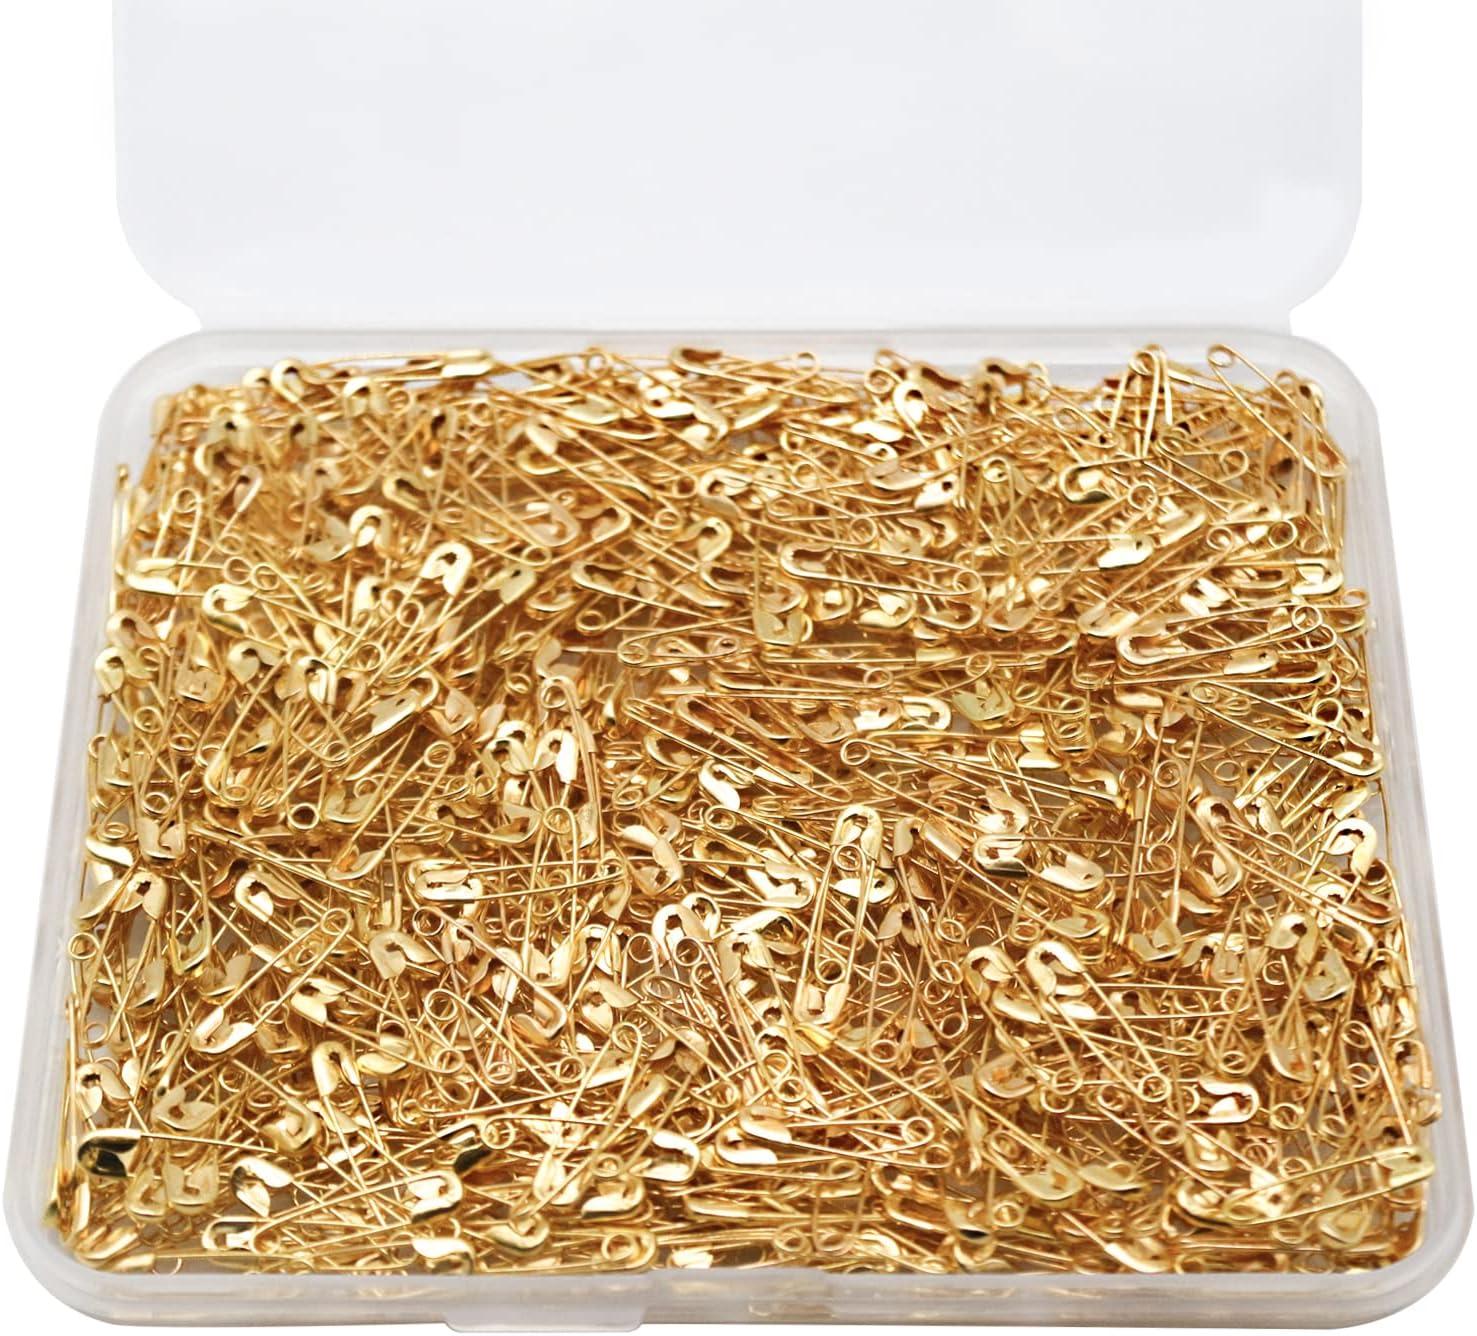 Gold Color Safety Pins Commonly Used Fasten Clothing Isolated